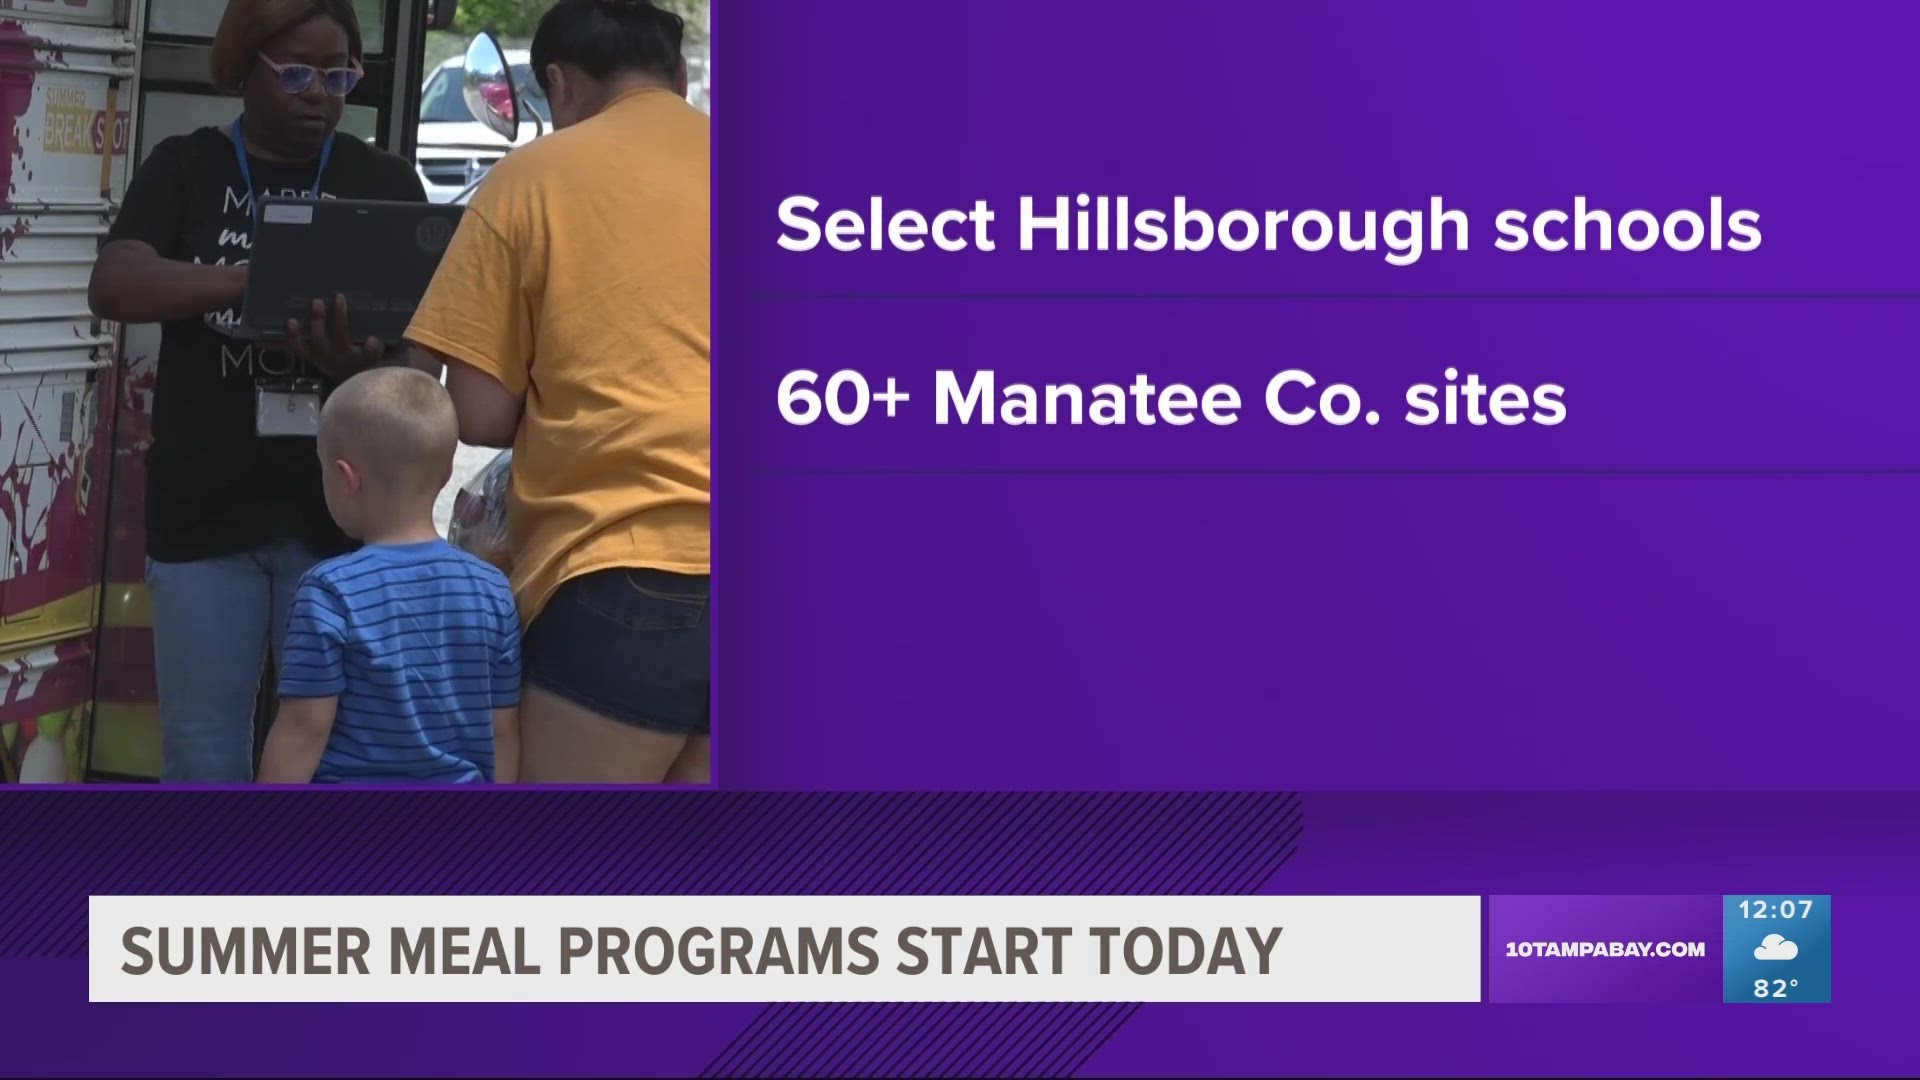 Meals are available at several sites across Manatee and Hillsborough counties.